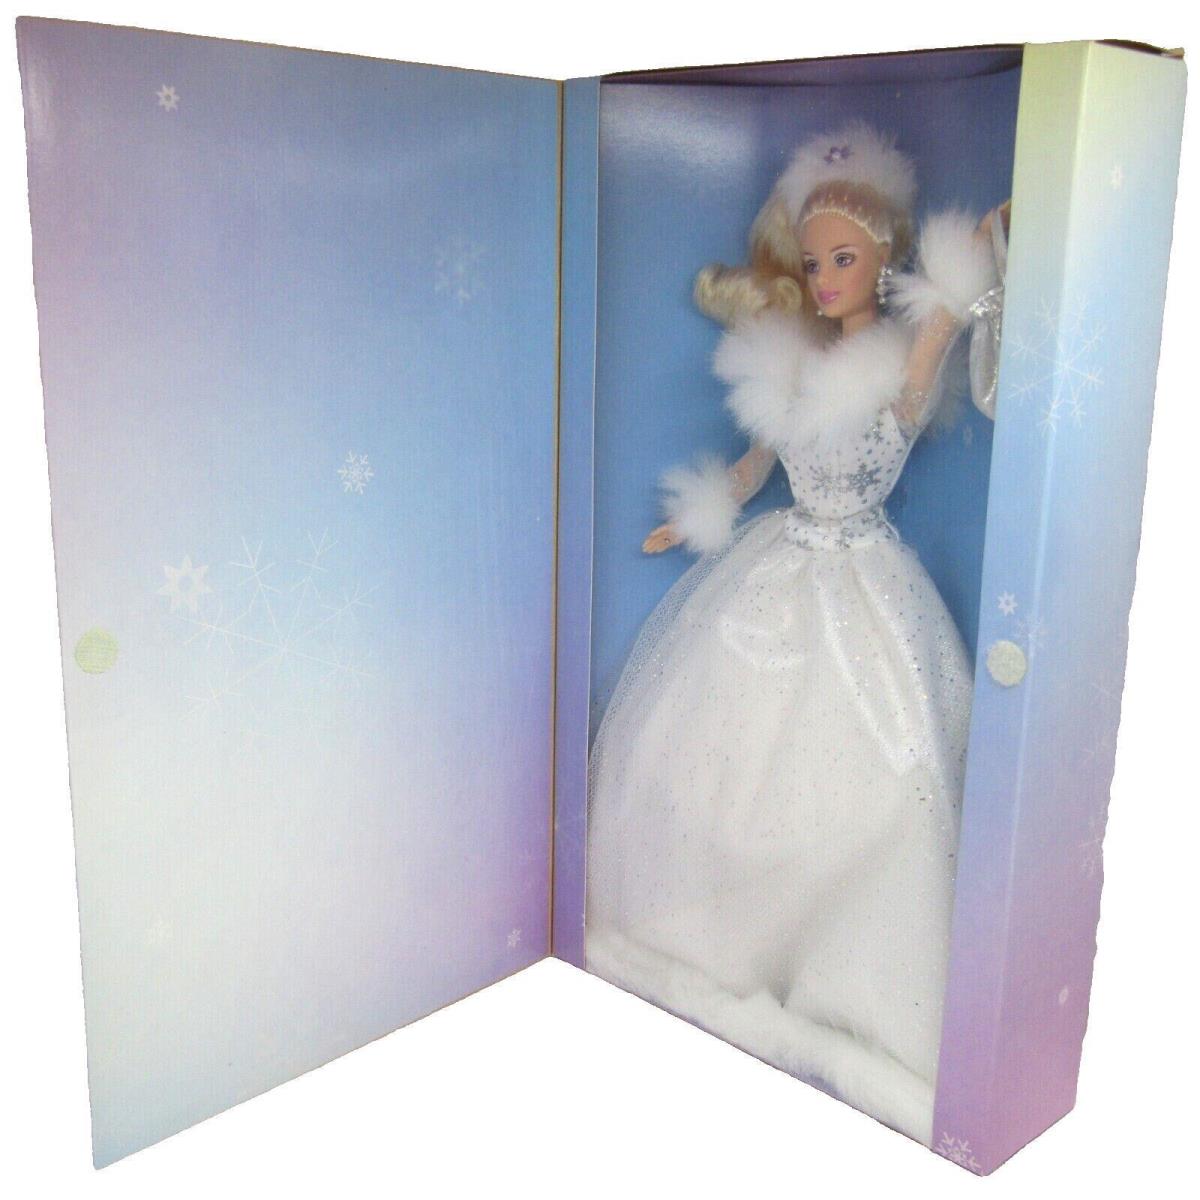 2002 Winter S Reflection Barbie Doll 55682